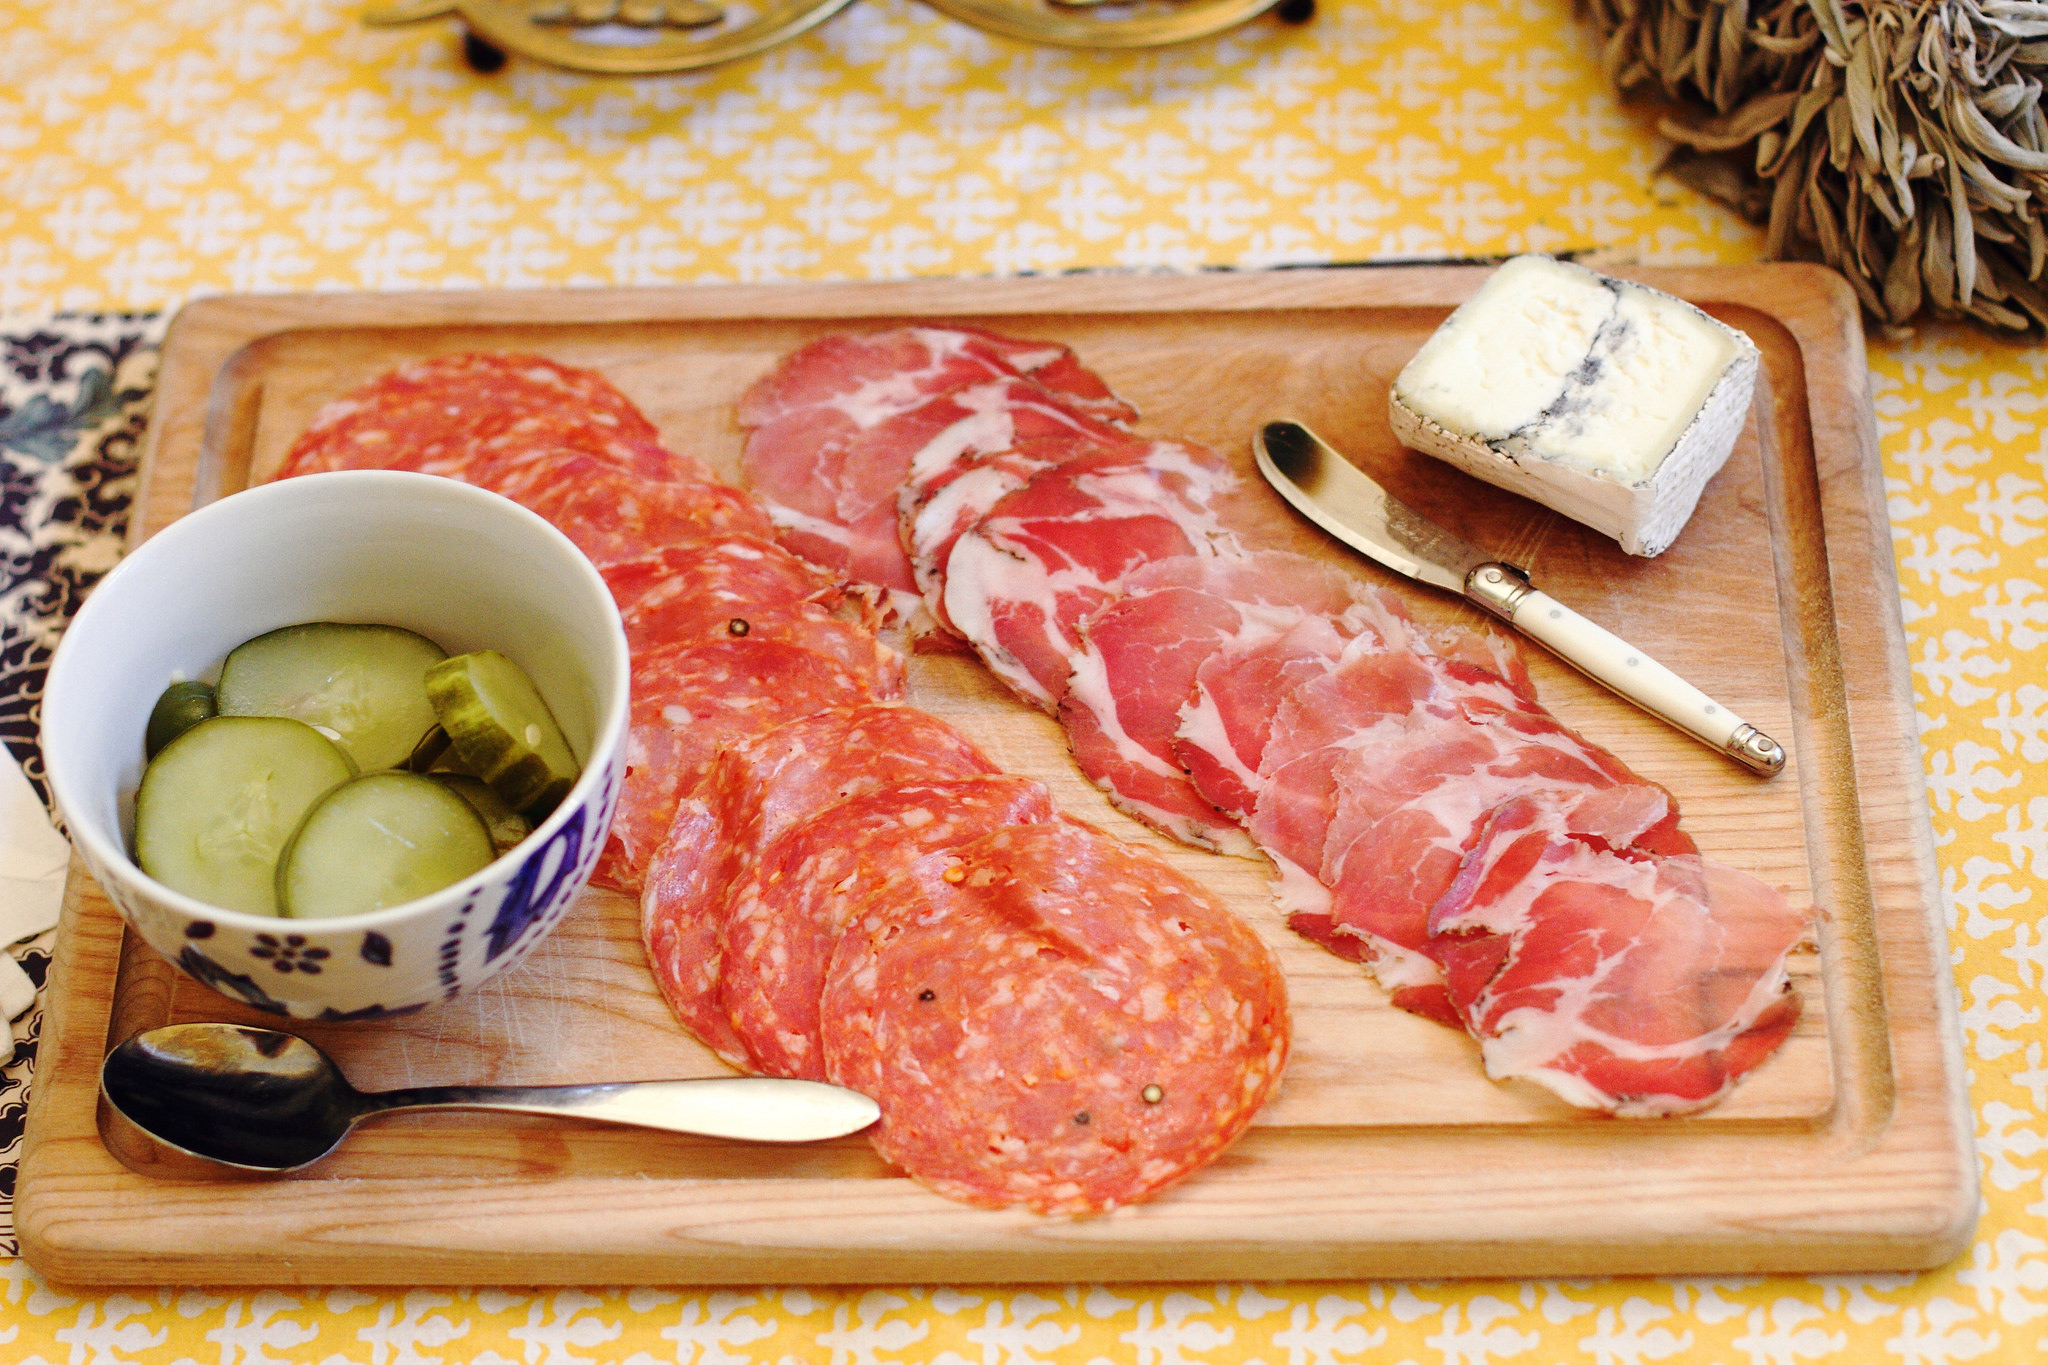 charcuterie and homemade pickles